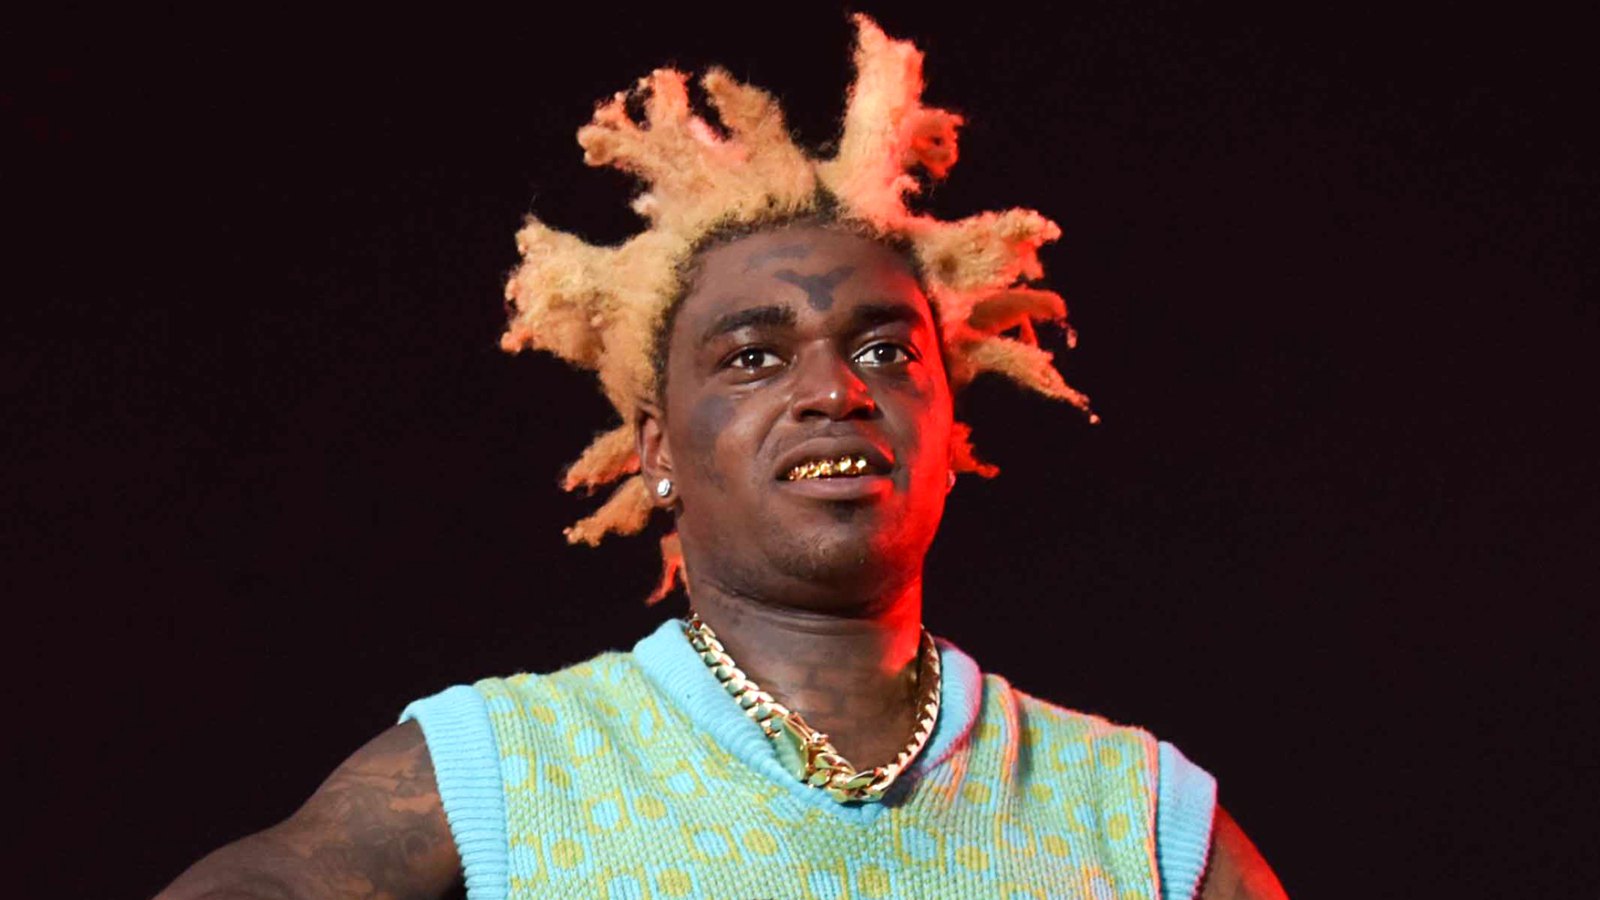 Rapper Kodak Black and 3 Others Shot Outside Justin Bieber's Afterparty: Reports